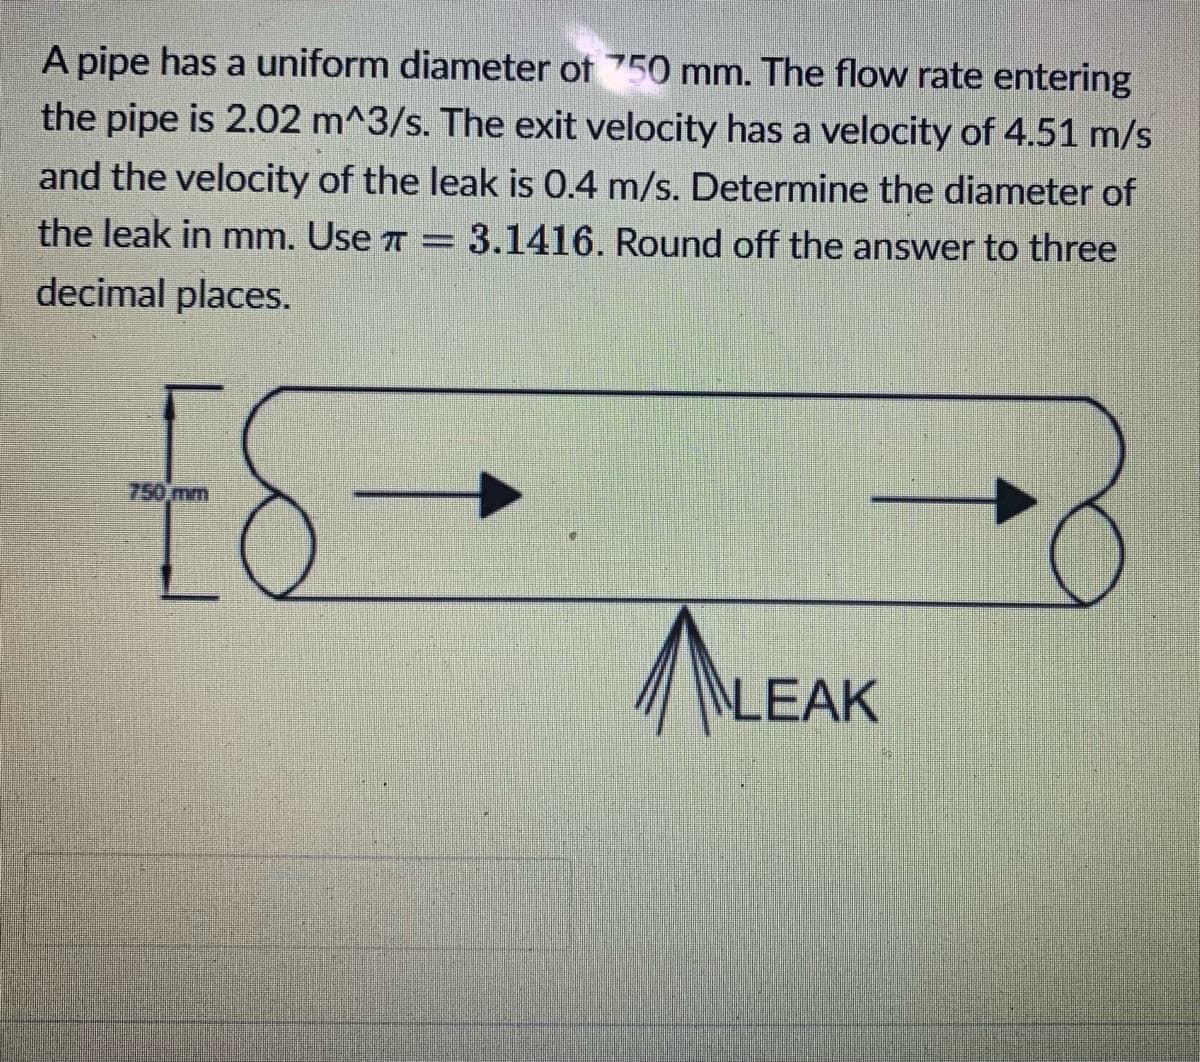 A pipe has a uniform diameter of 750 mm. The flow rate entering
the pipe is 2.02 m^3/s. The exit velocity has a velocity of 4.51 m/s
and the velocity of the leak is 0.4 m/s. Determine the diameter of
the leak in mm. Use 7
3.1416. Round off the answer to three
decimal places.
ES
NLEAK
750 mm
